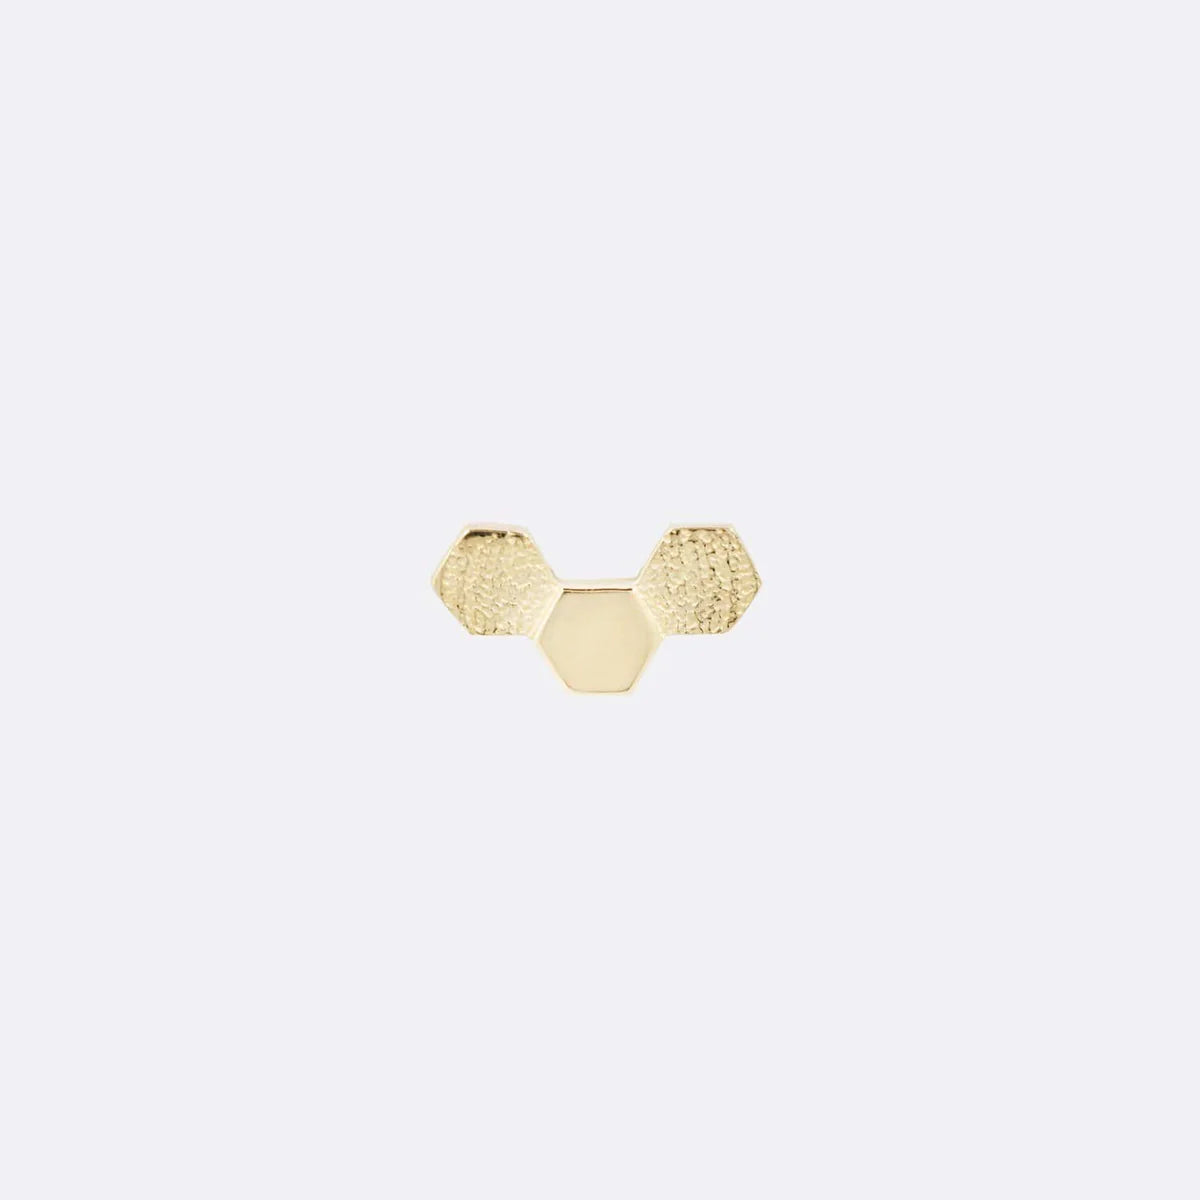 TETHER - GAMMA 08 - 14KT SOLID GOLD - THREADLESS END